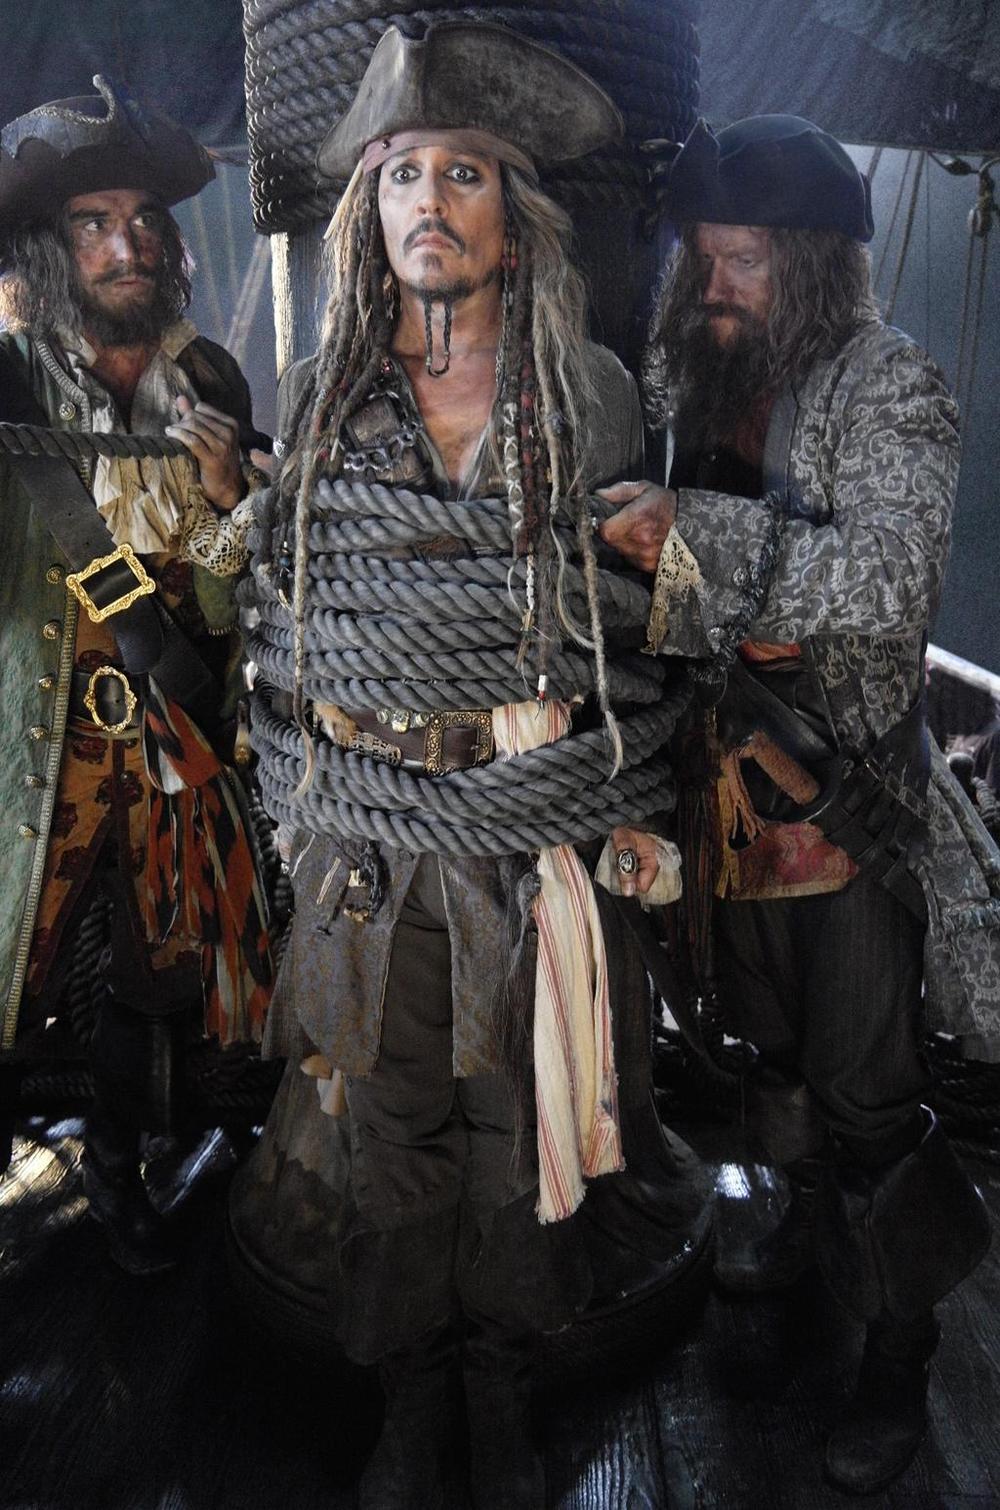 NEWS for Pirates 5 "Dead Men Tell No Tales" [WARNING] may contain spoilers - Page 9 First-photo-of-johnny-deep-as-jack-sparrow-in-pirates-of-the-caribbean-5